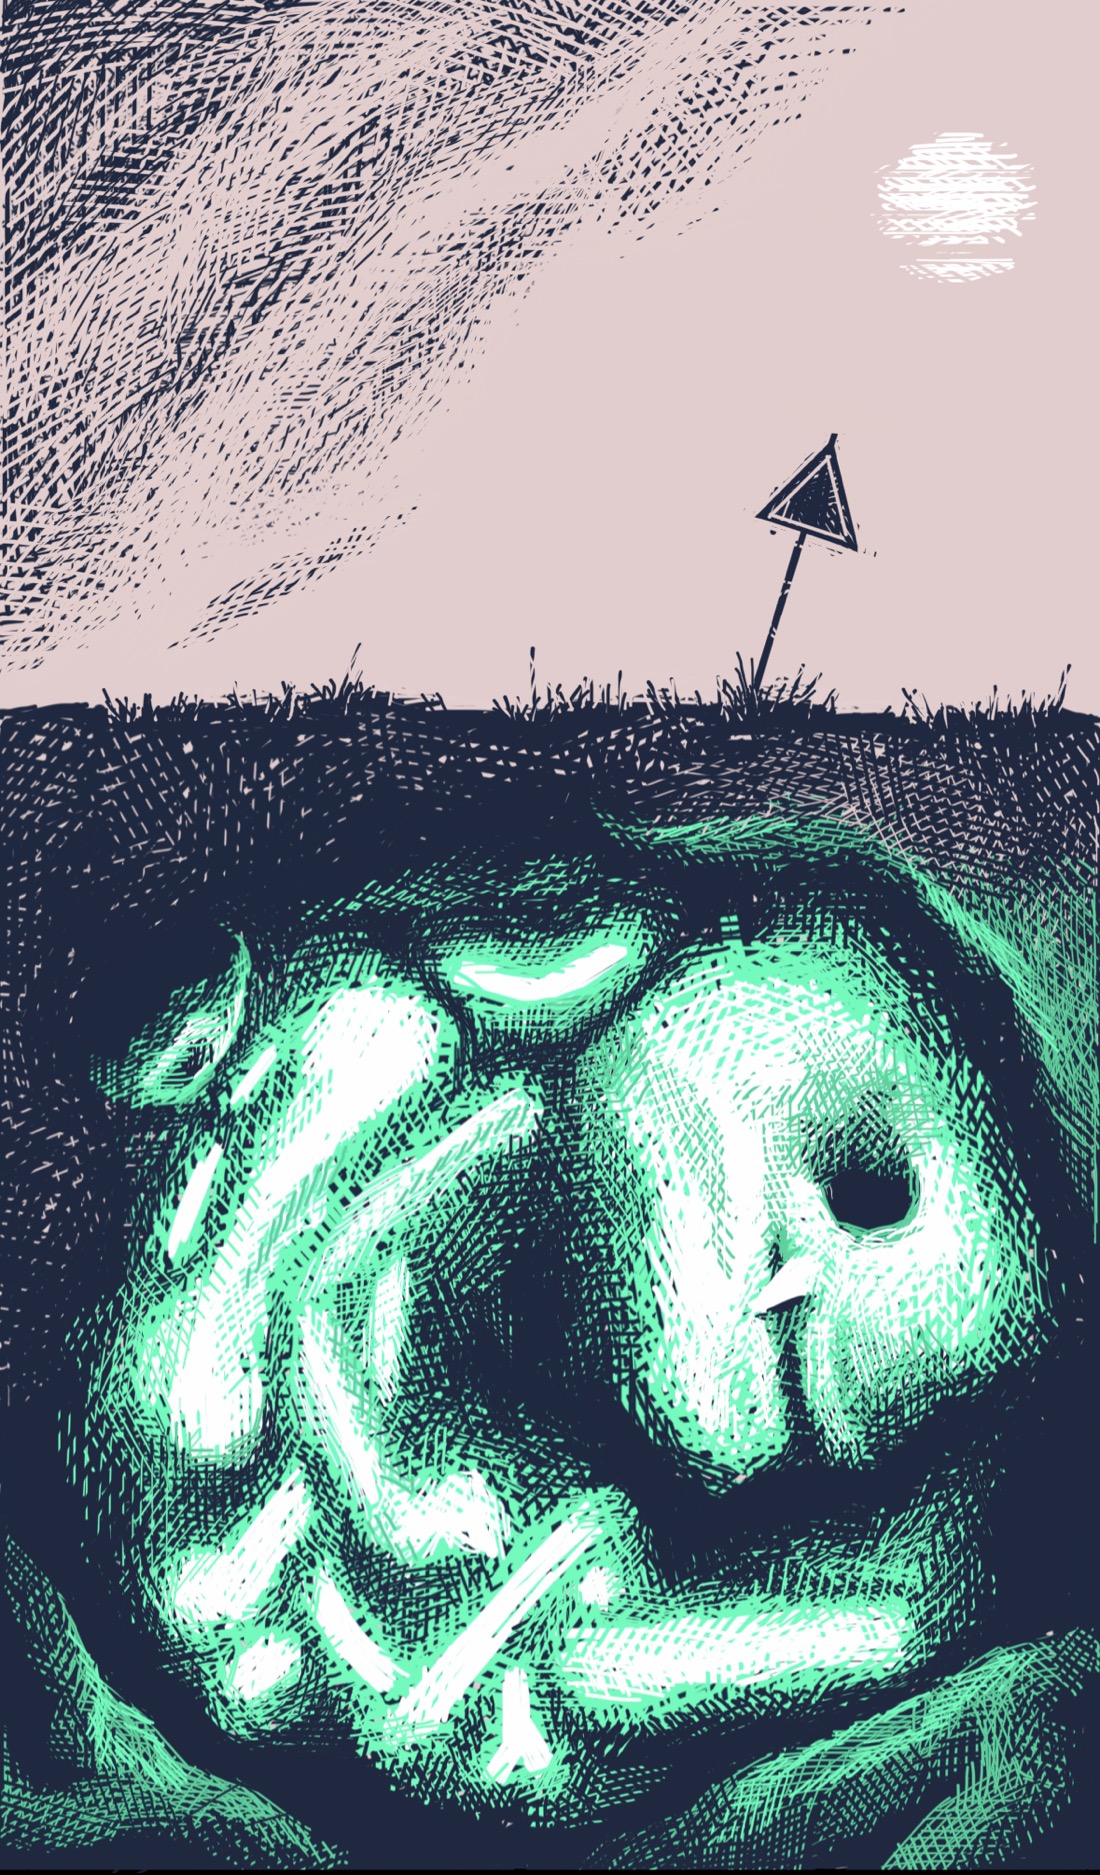 A collection of huge, glowing bones lies under the ground in a rocky cavern, as though a radioactive dinosaur has died there. The ground above the bones is barren and flat; the sky is overcast. A ghost of a sun shows through. Planted in the ground right above the bones in a small, triangular warning sign. There's nothing visible on the sign, but the shape suggests it is warning about those glowing bones under the ground.